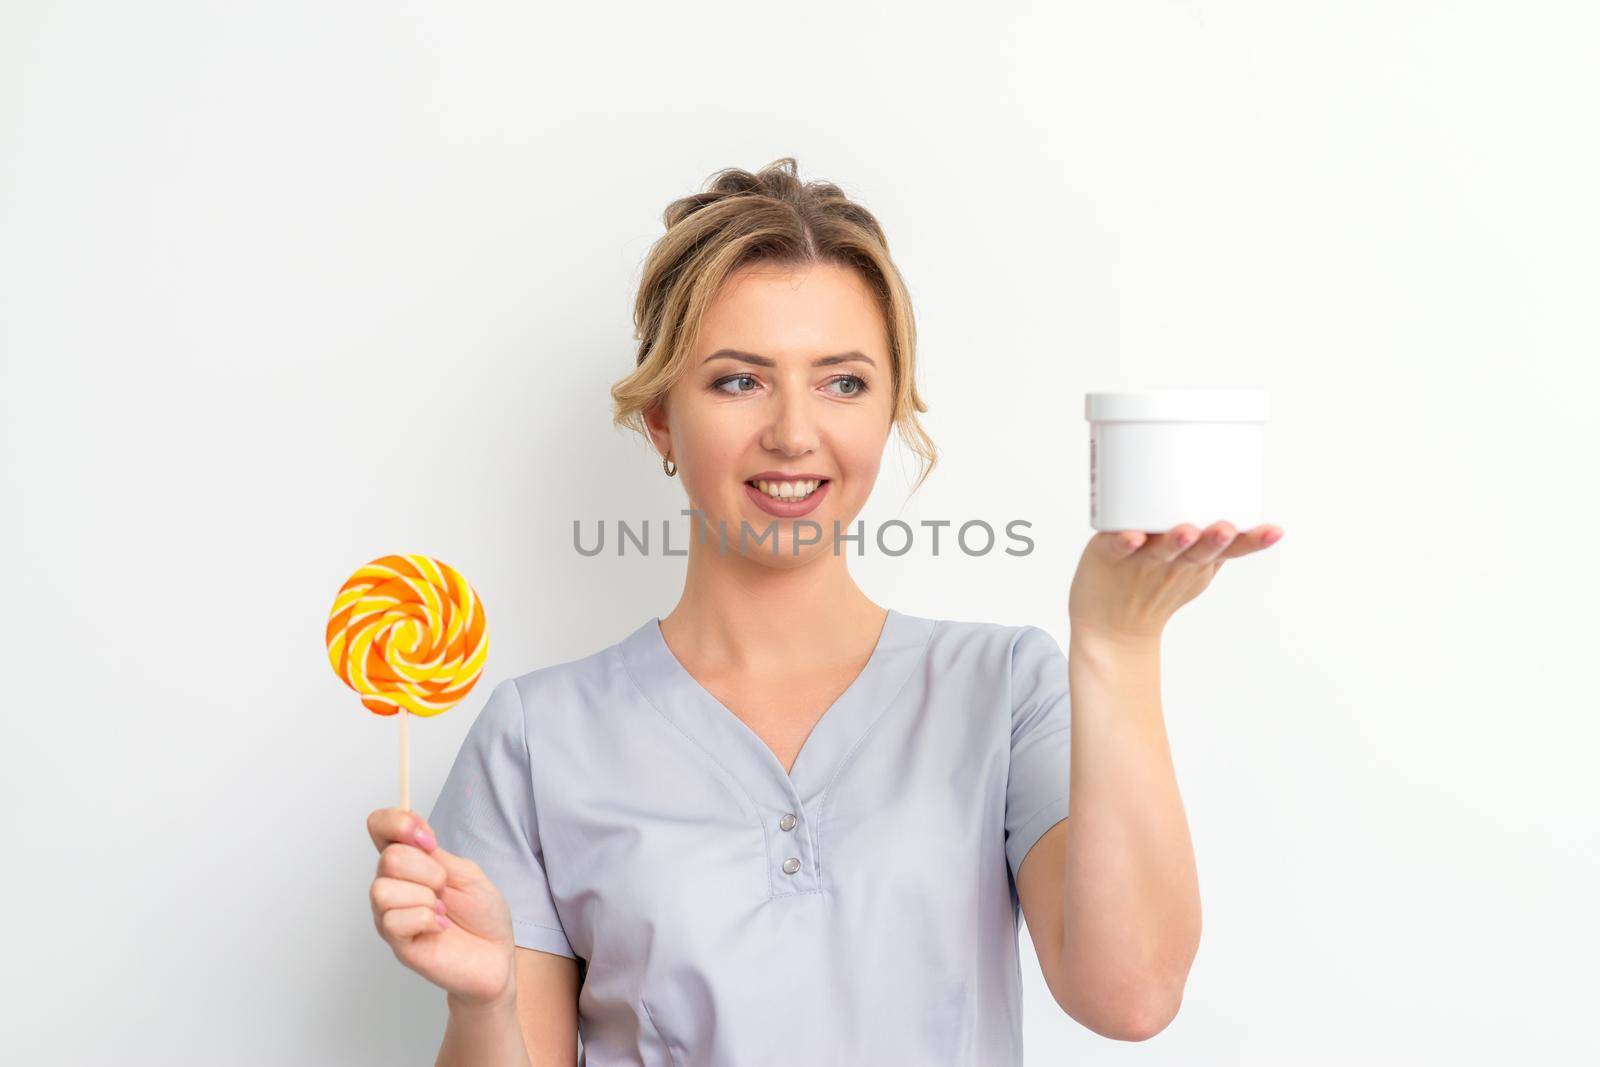 Beautician holding a jar of wax for waxing and candy on a stick smiling on a white background. Natural product for hair removal